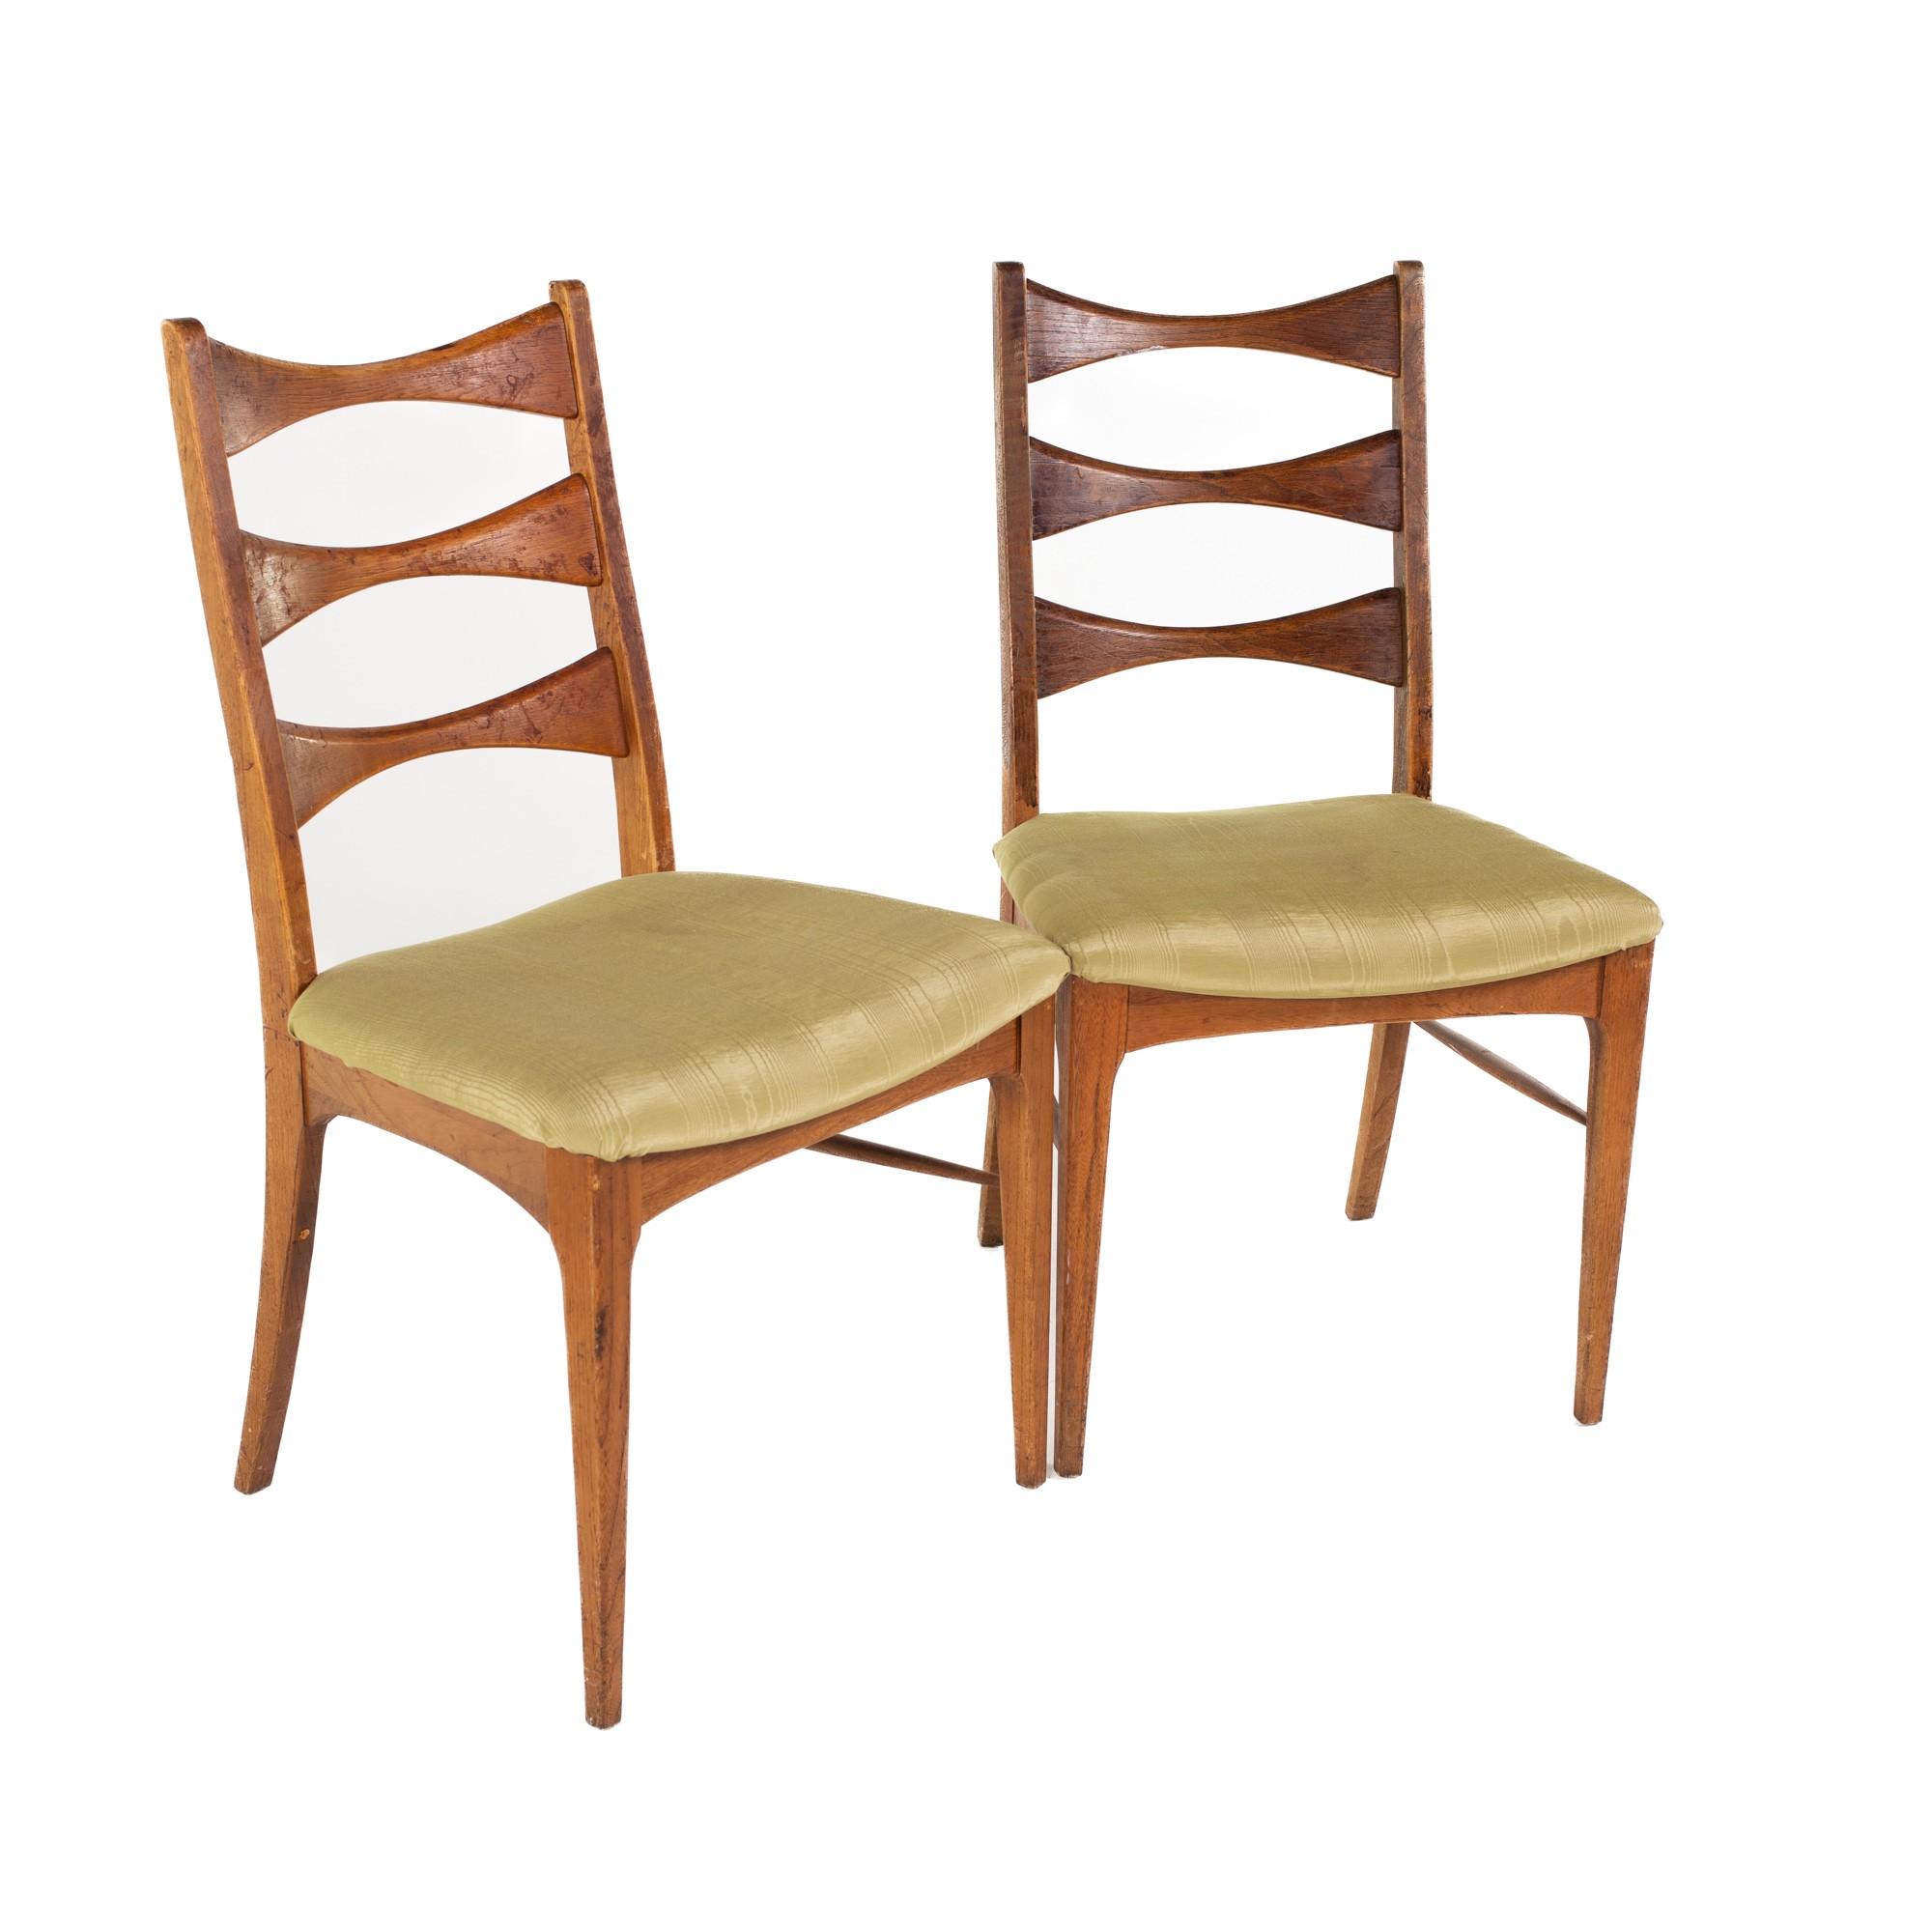 Heywood Wakefield Style Mid Century Ladder Back Chairs - Pair